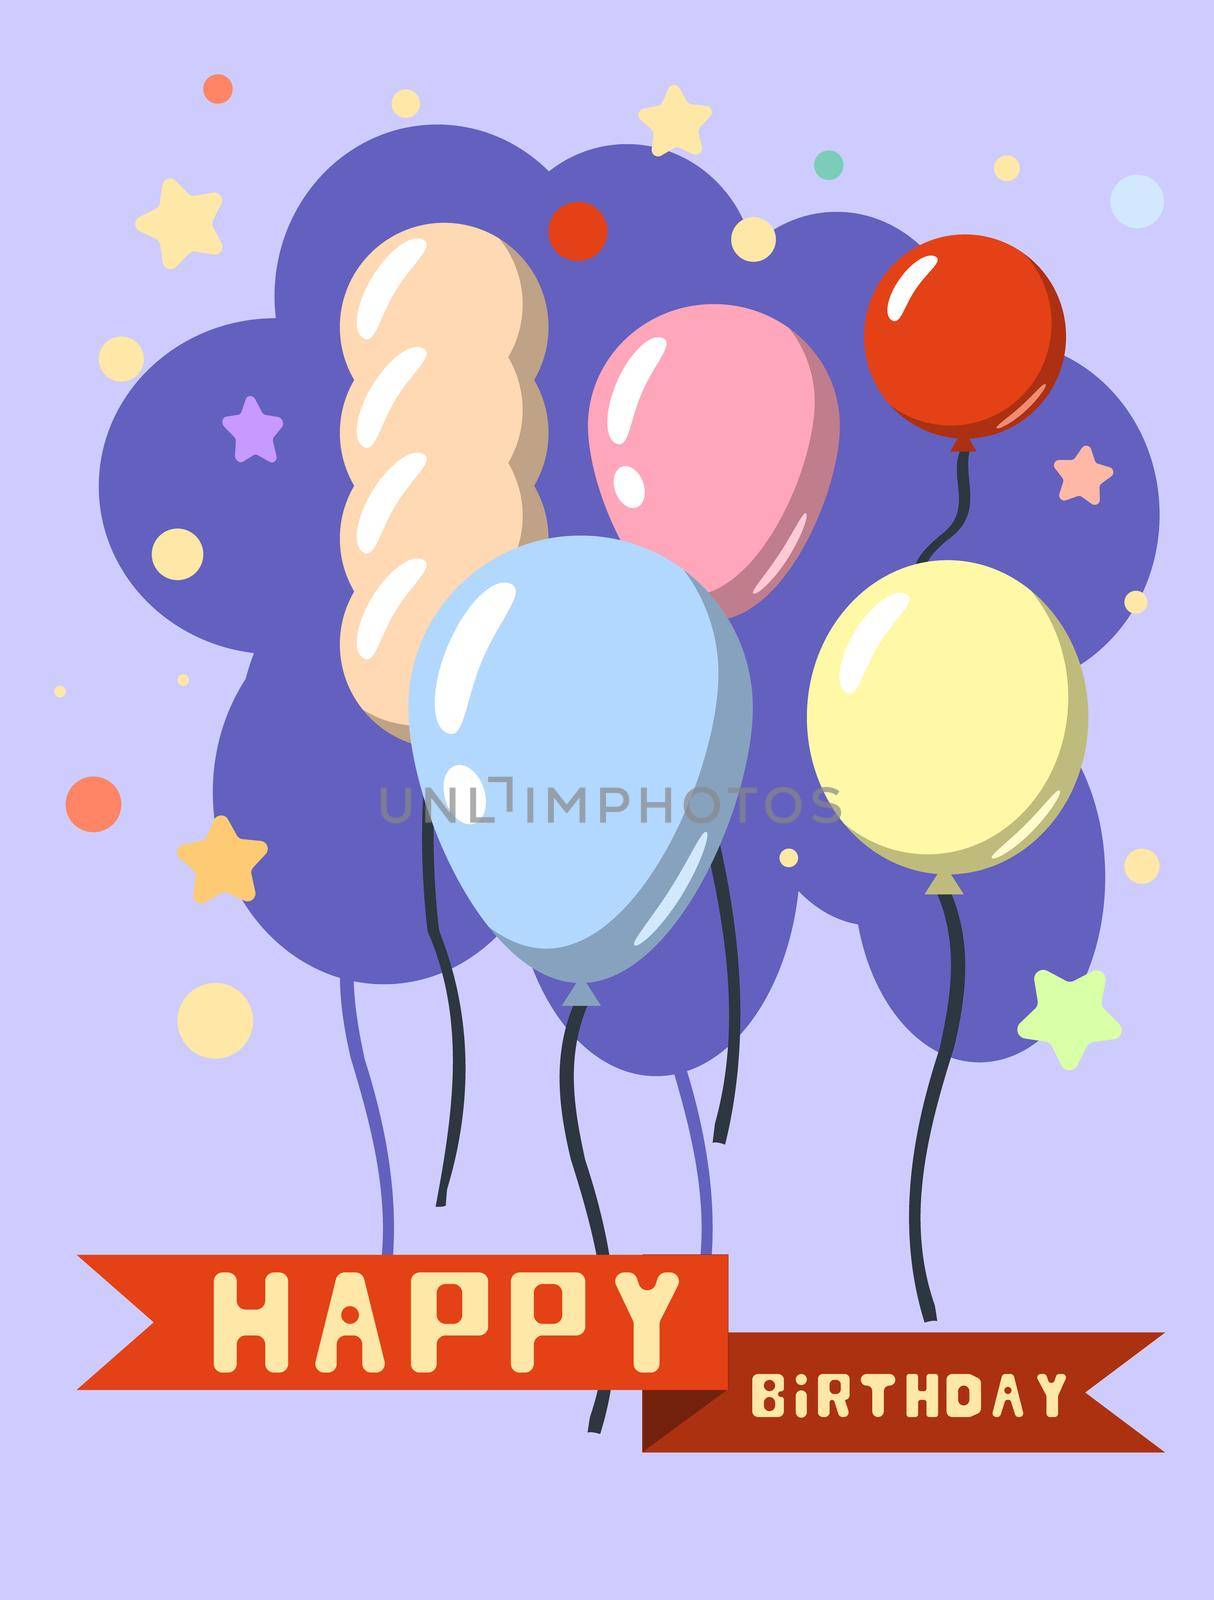 Colorful Happy Birthday in a flat style. illustration